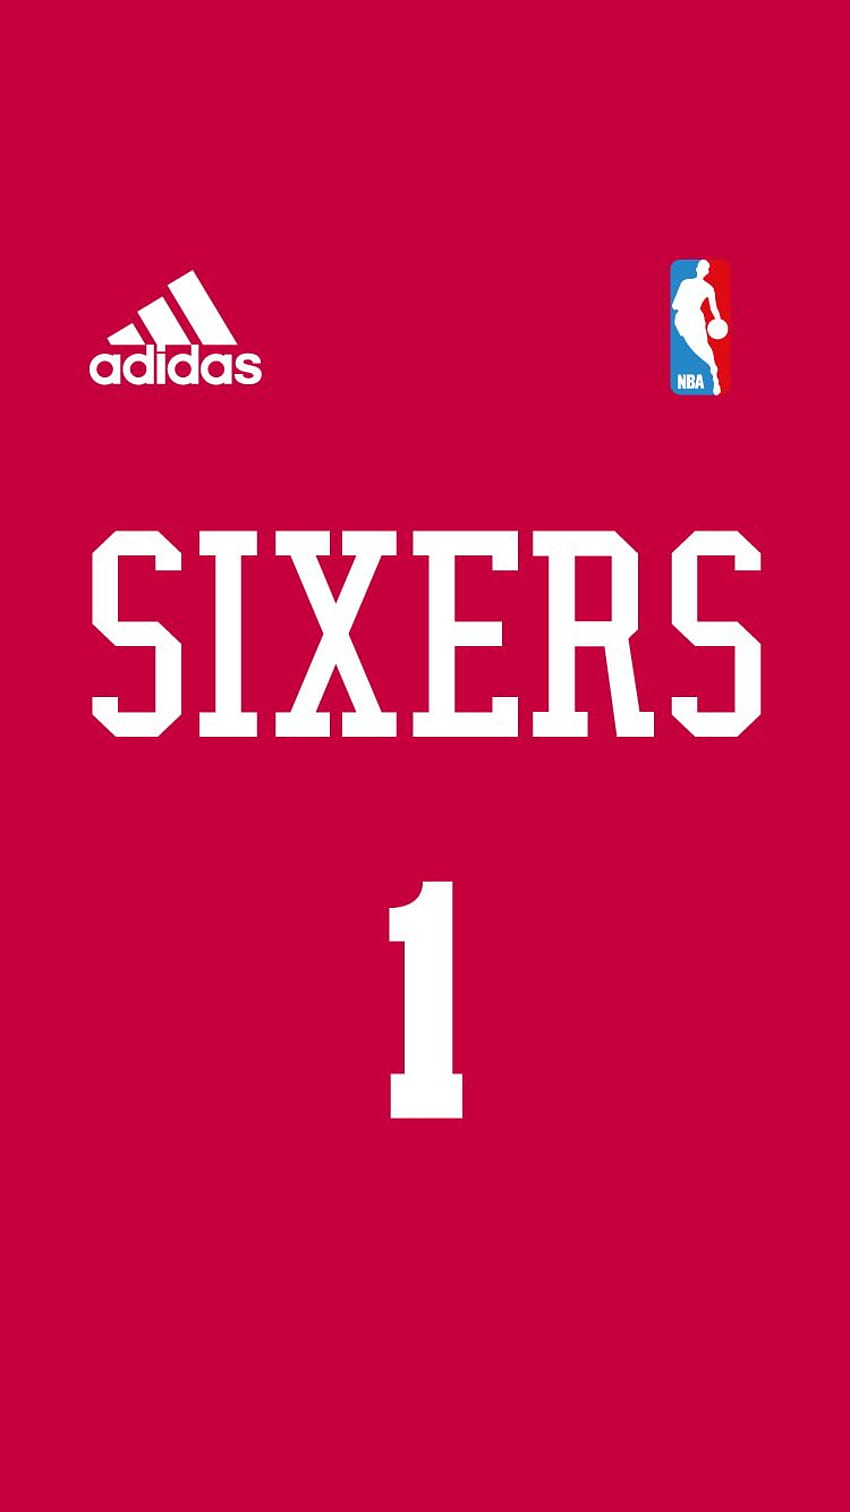 Trevor Gibbons on iPhone 6 NBA Jersey Project, Sixers HD phone wallpaper